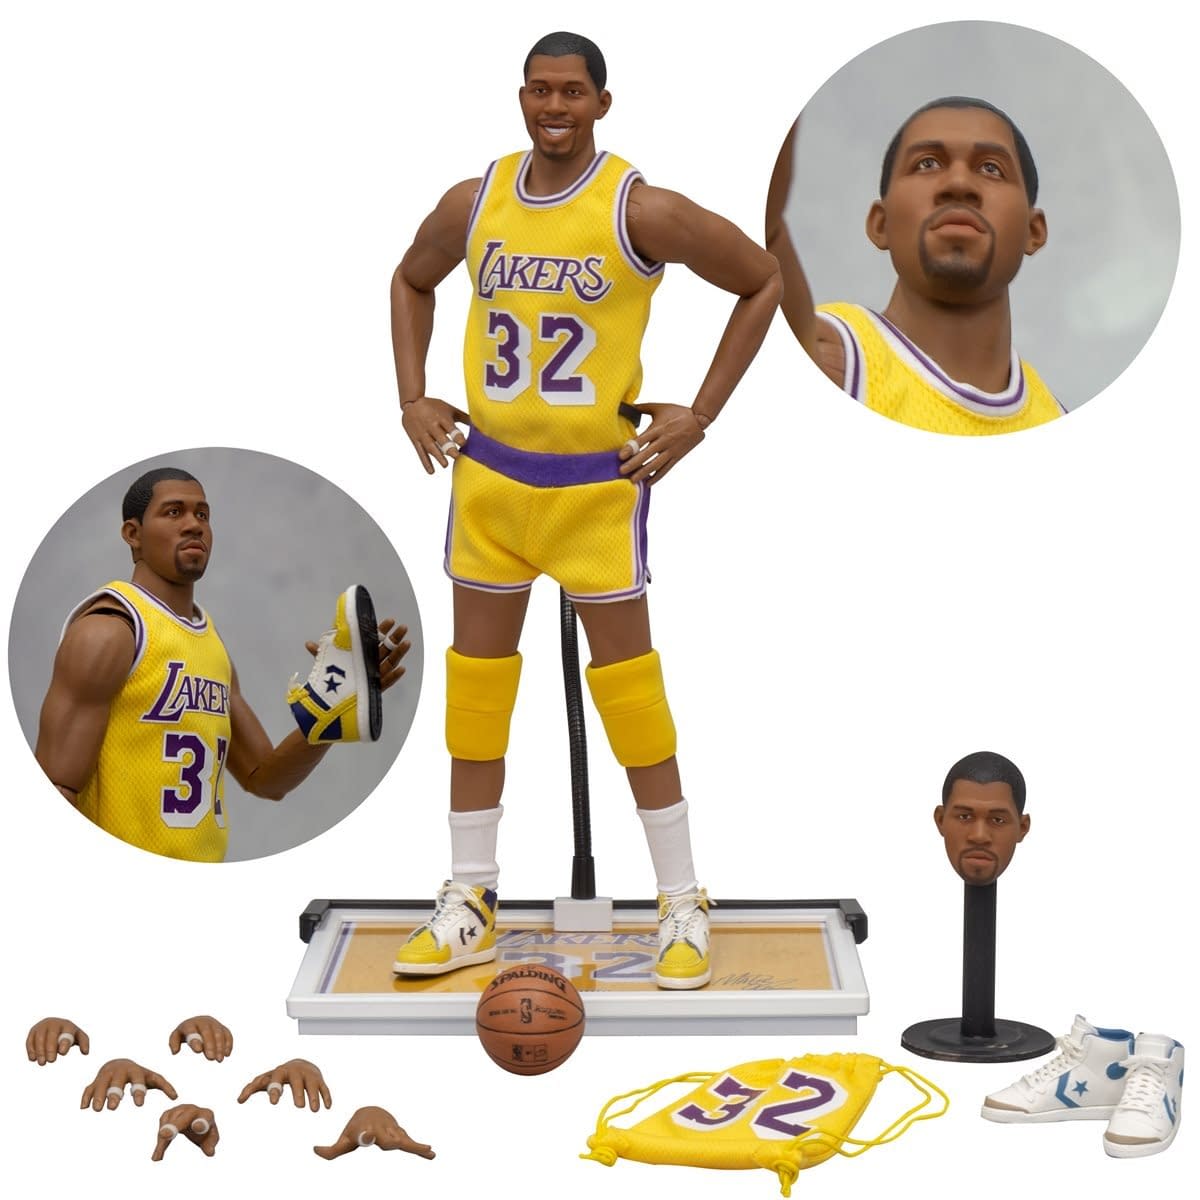 Magic Johnson Gets a Throwback with New Figure Cool Collectible